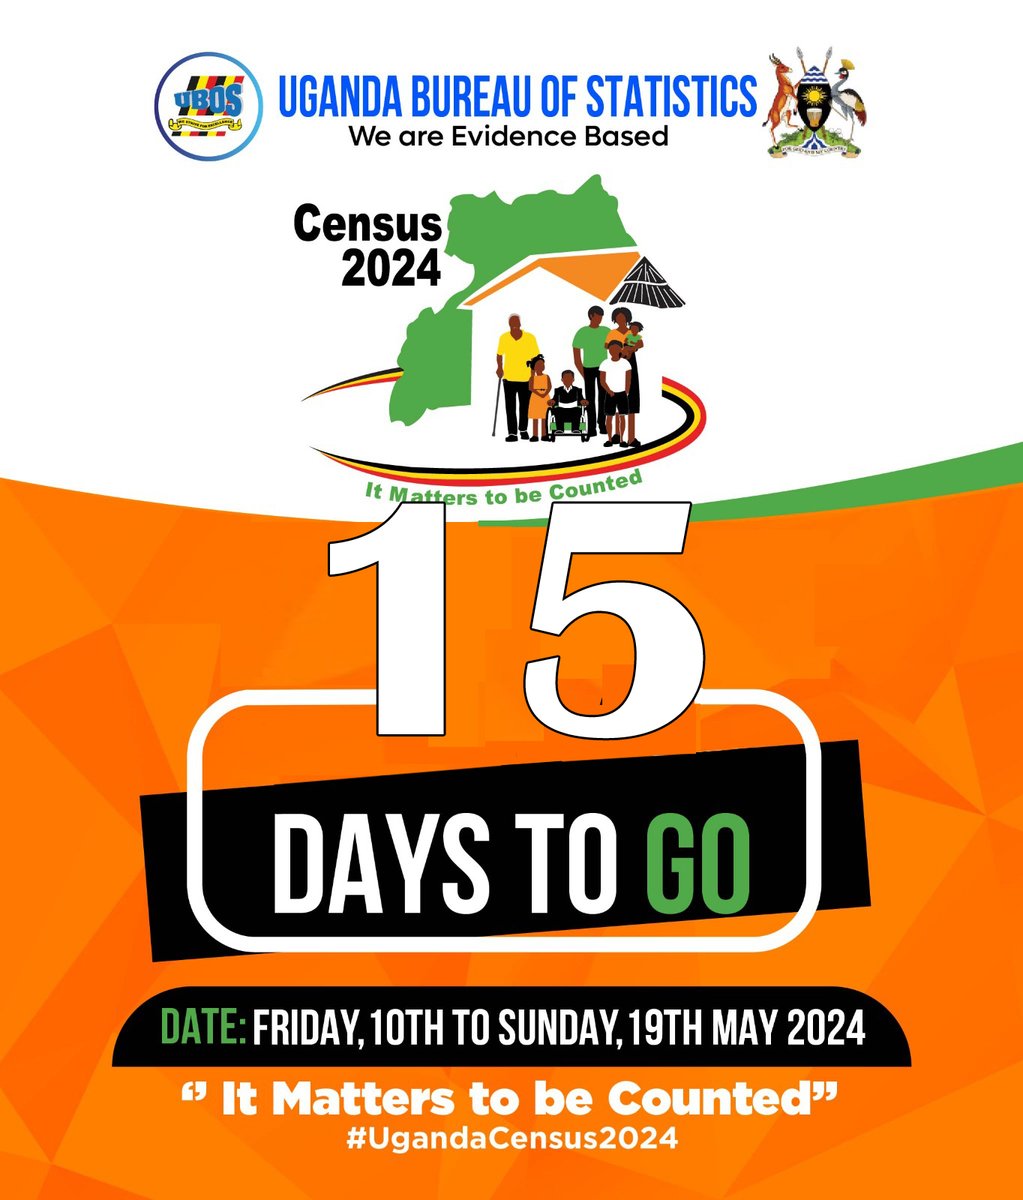 Uganda, are you ready for the upcoming #Ugandacensus2024 in 15 days? Spread the word to your friends and family! Good Morning🤗 #UGCensusCountdown